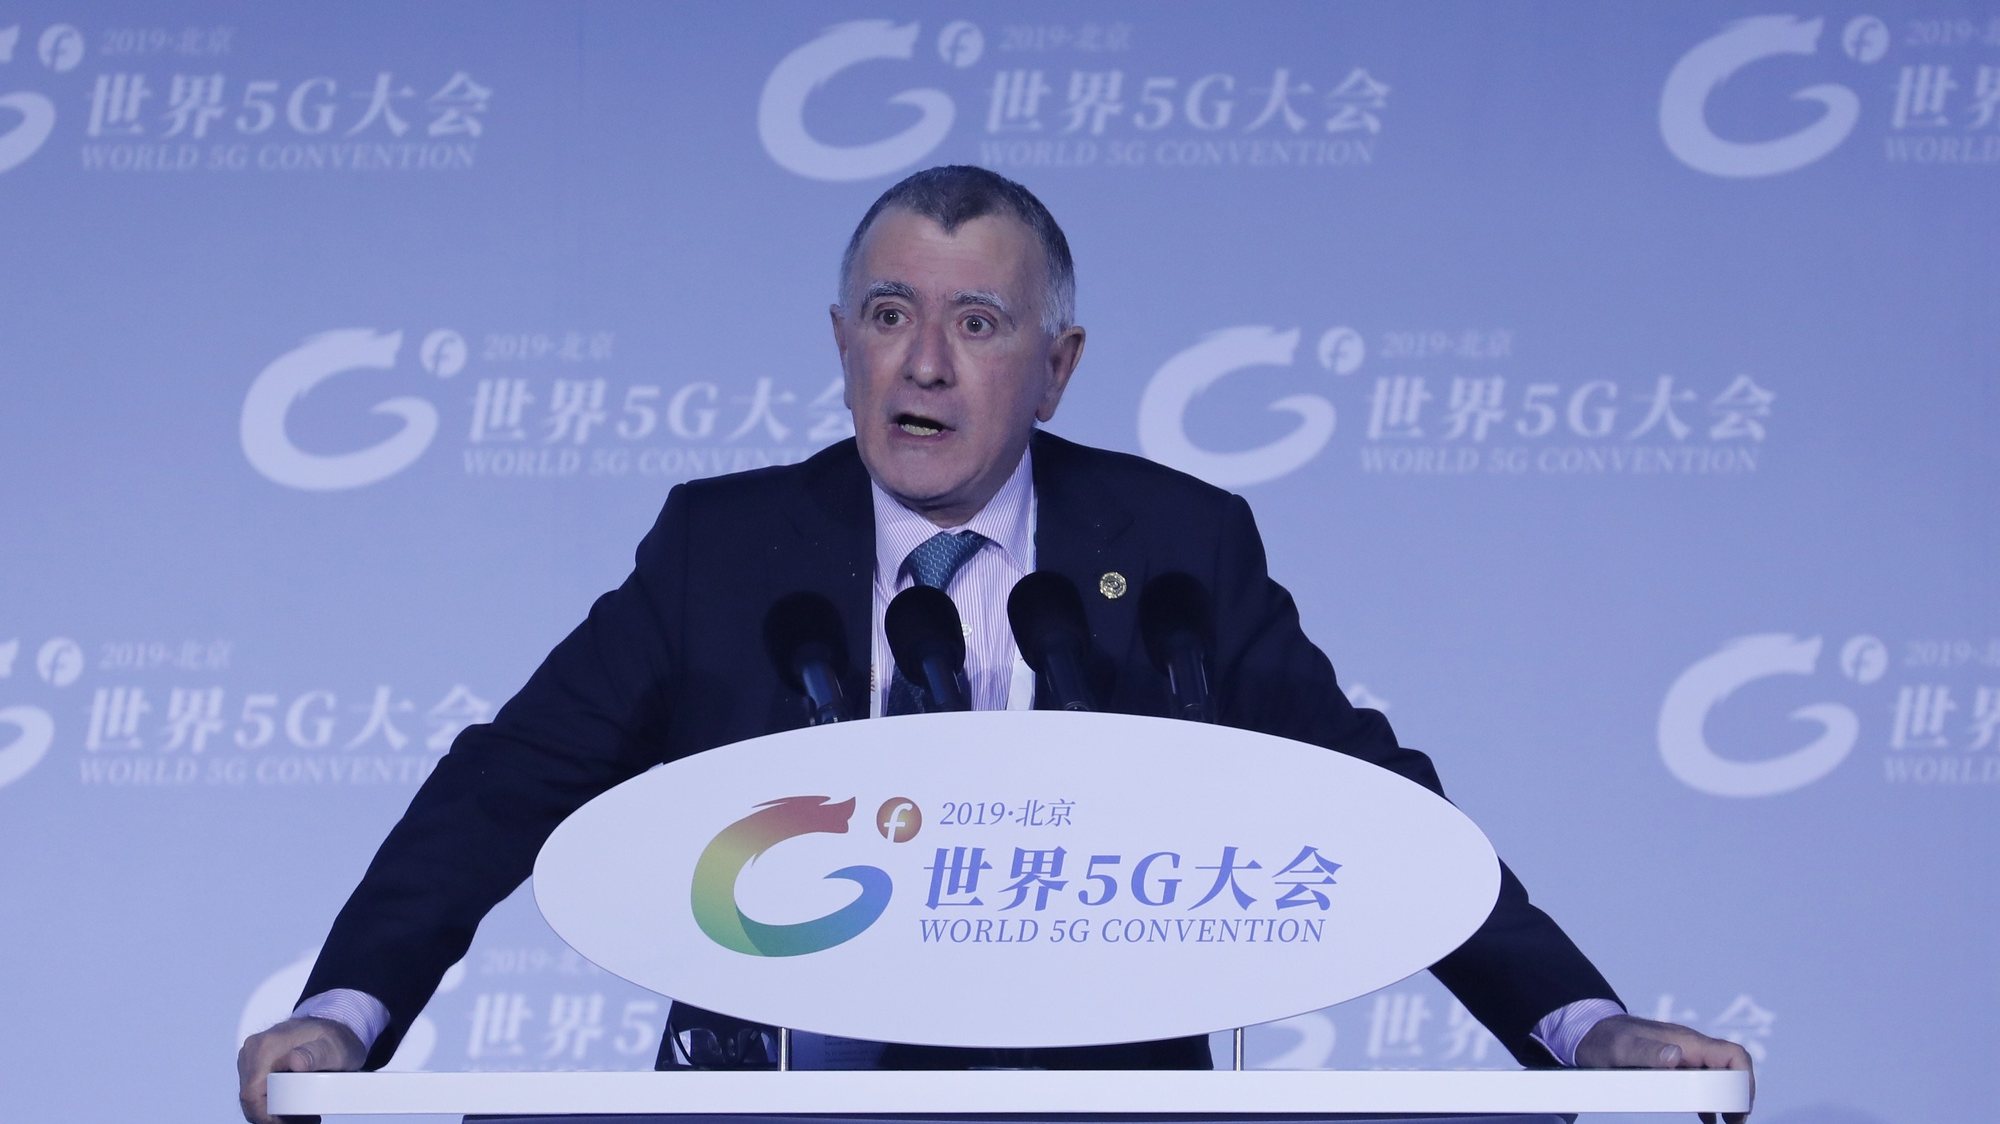 epa08013739 Nicolas Chapuis, European Union Ambassador to China, speaks at the 2019 World 5G Convention in Beijing, China, 21 November 2019. The event runs from 20 through to 23 November 2019. China has built over 100,000 5G base stations around the country.  EPA/WU HONG